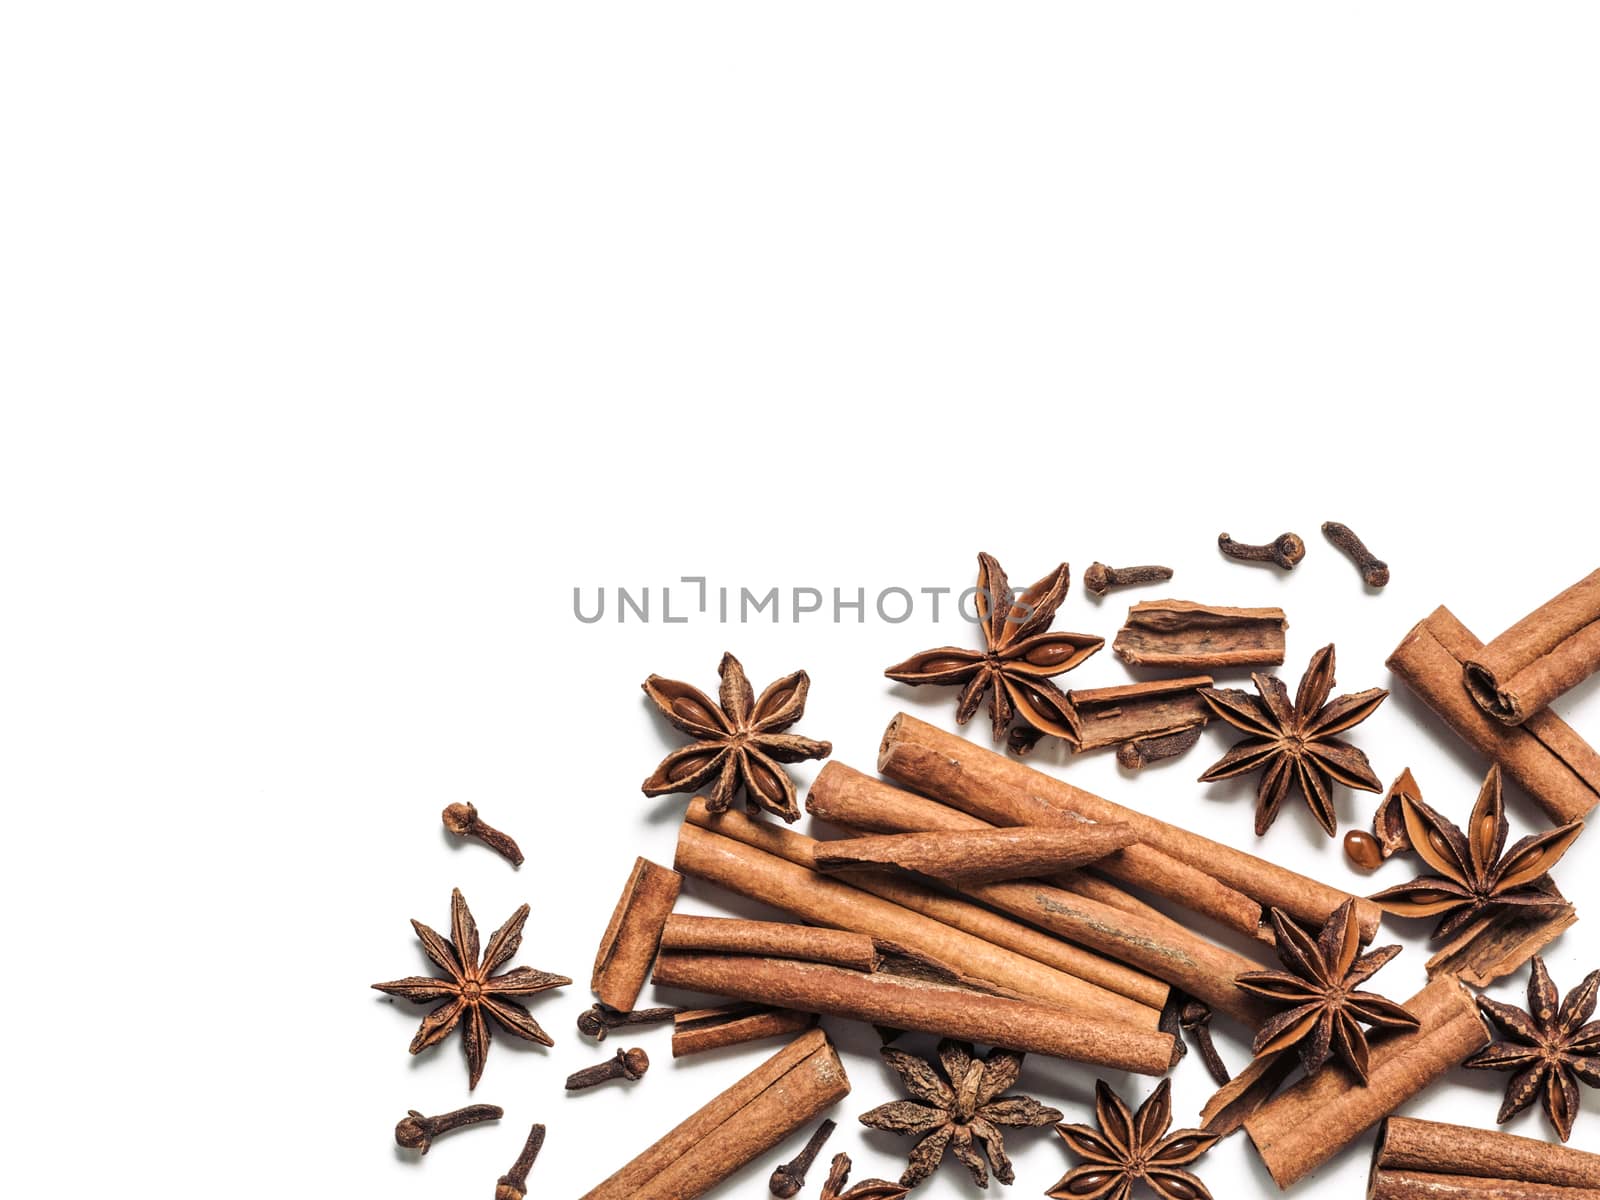 Winter spices background. Cinnamon, cloves and star anise with copy space. Isolated on white with clipping path. Top view or flat lay. Winter food background concept.